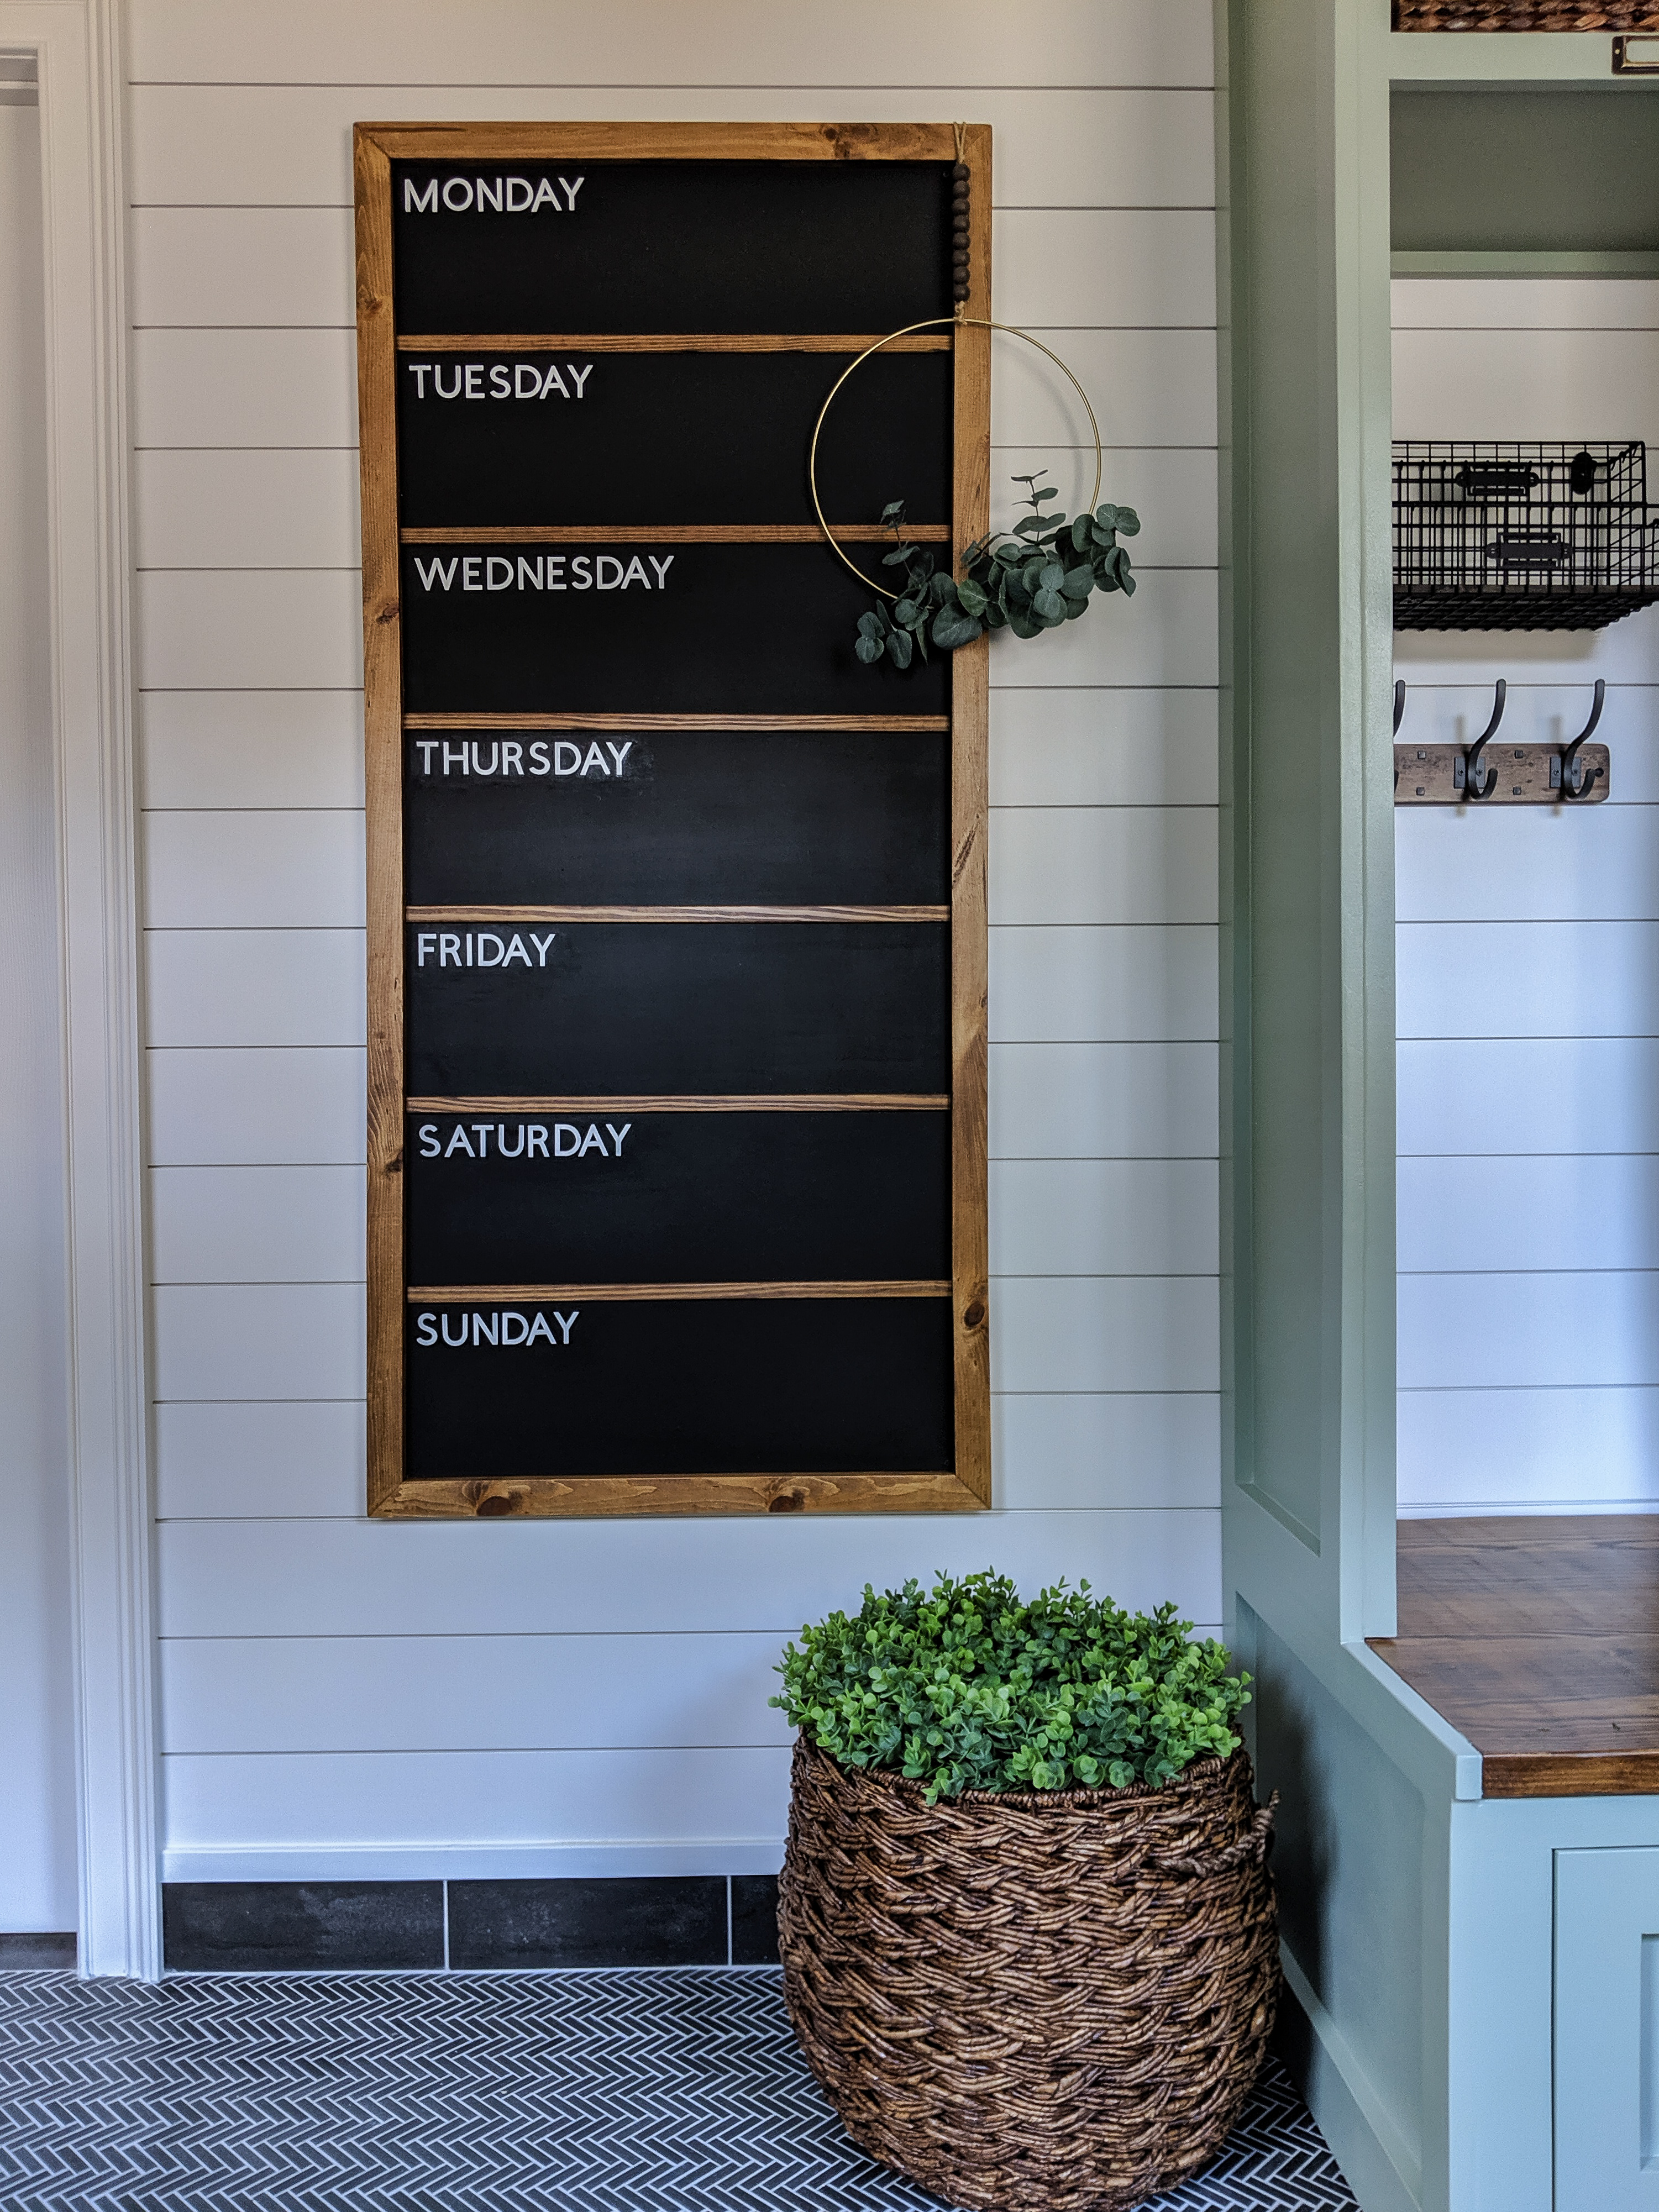 Mudroom-built-in-organizer-and-weekly-chalkboard